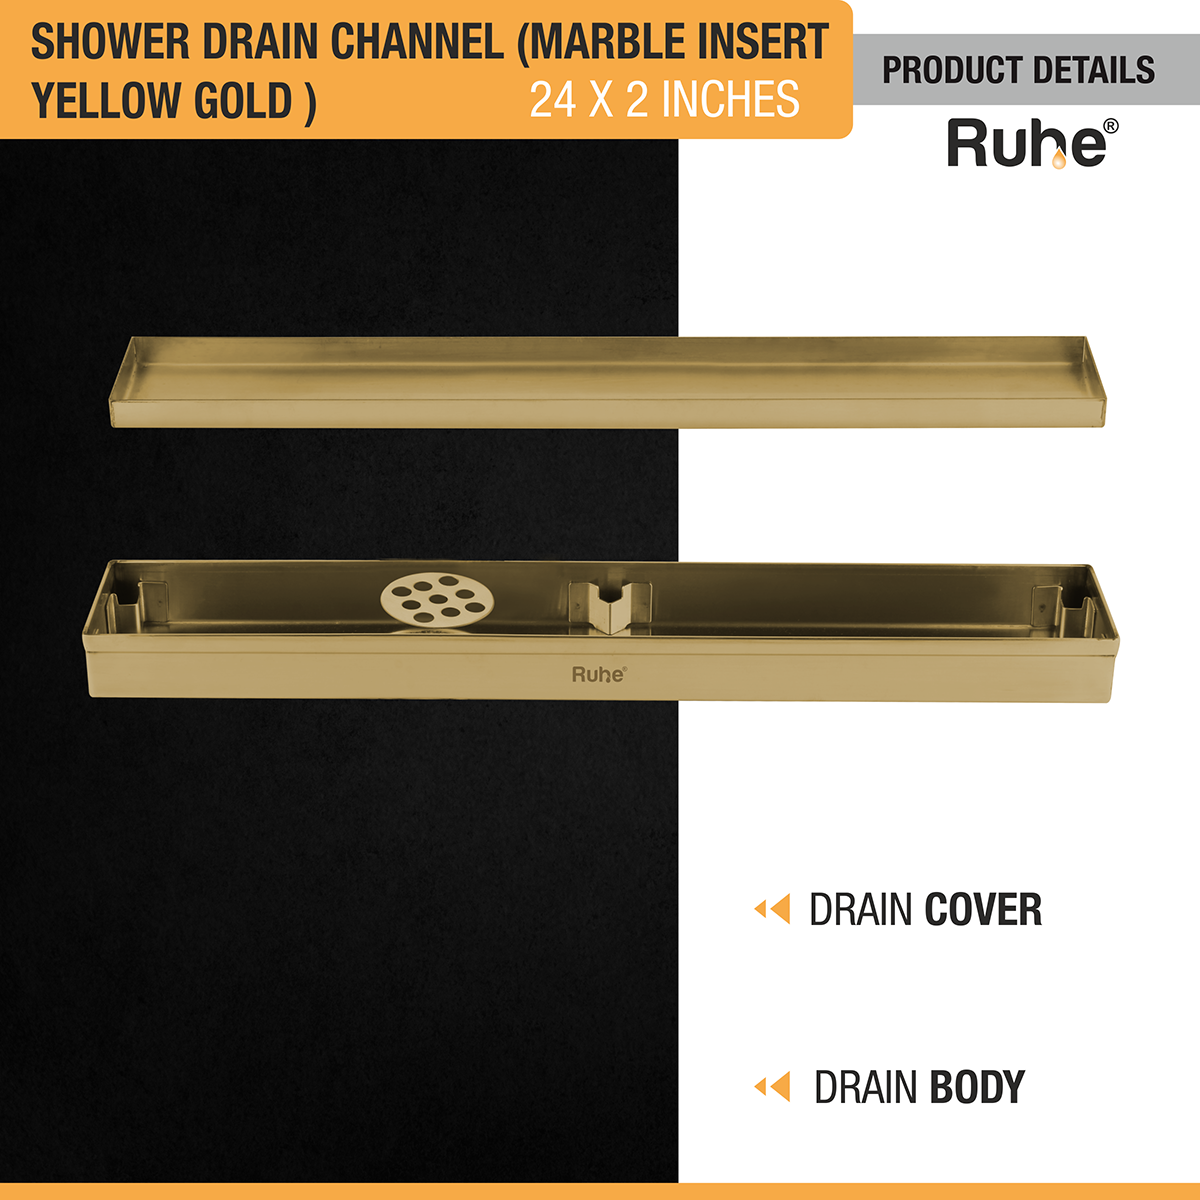 Marble Insert Shower Drain Channel (24 x 2 Inches) YELLOW GOLD PVD Coated with drain cover and drain body